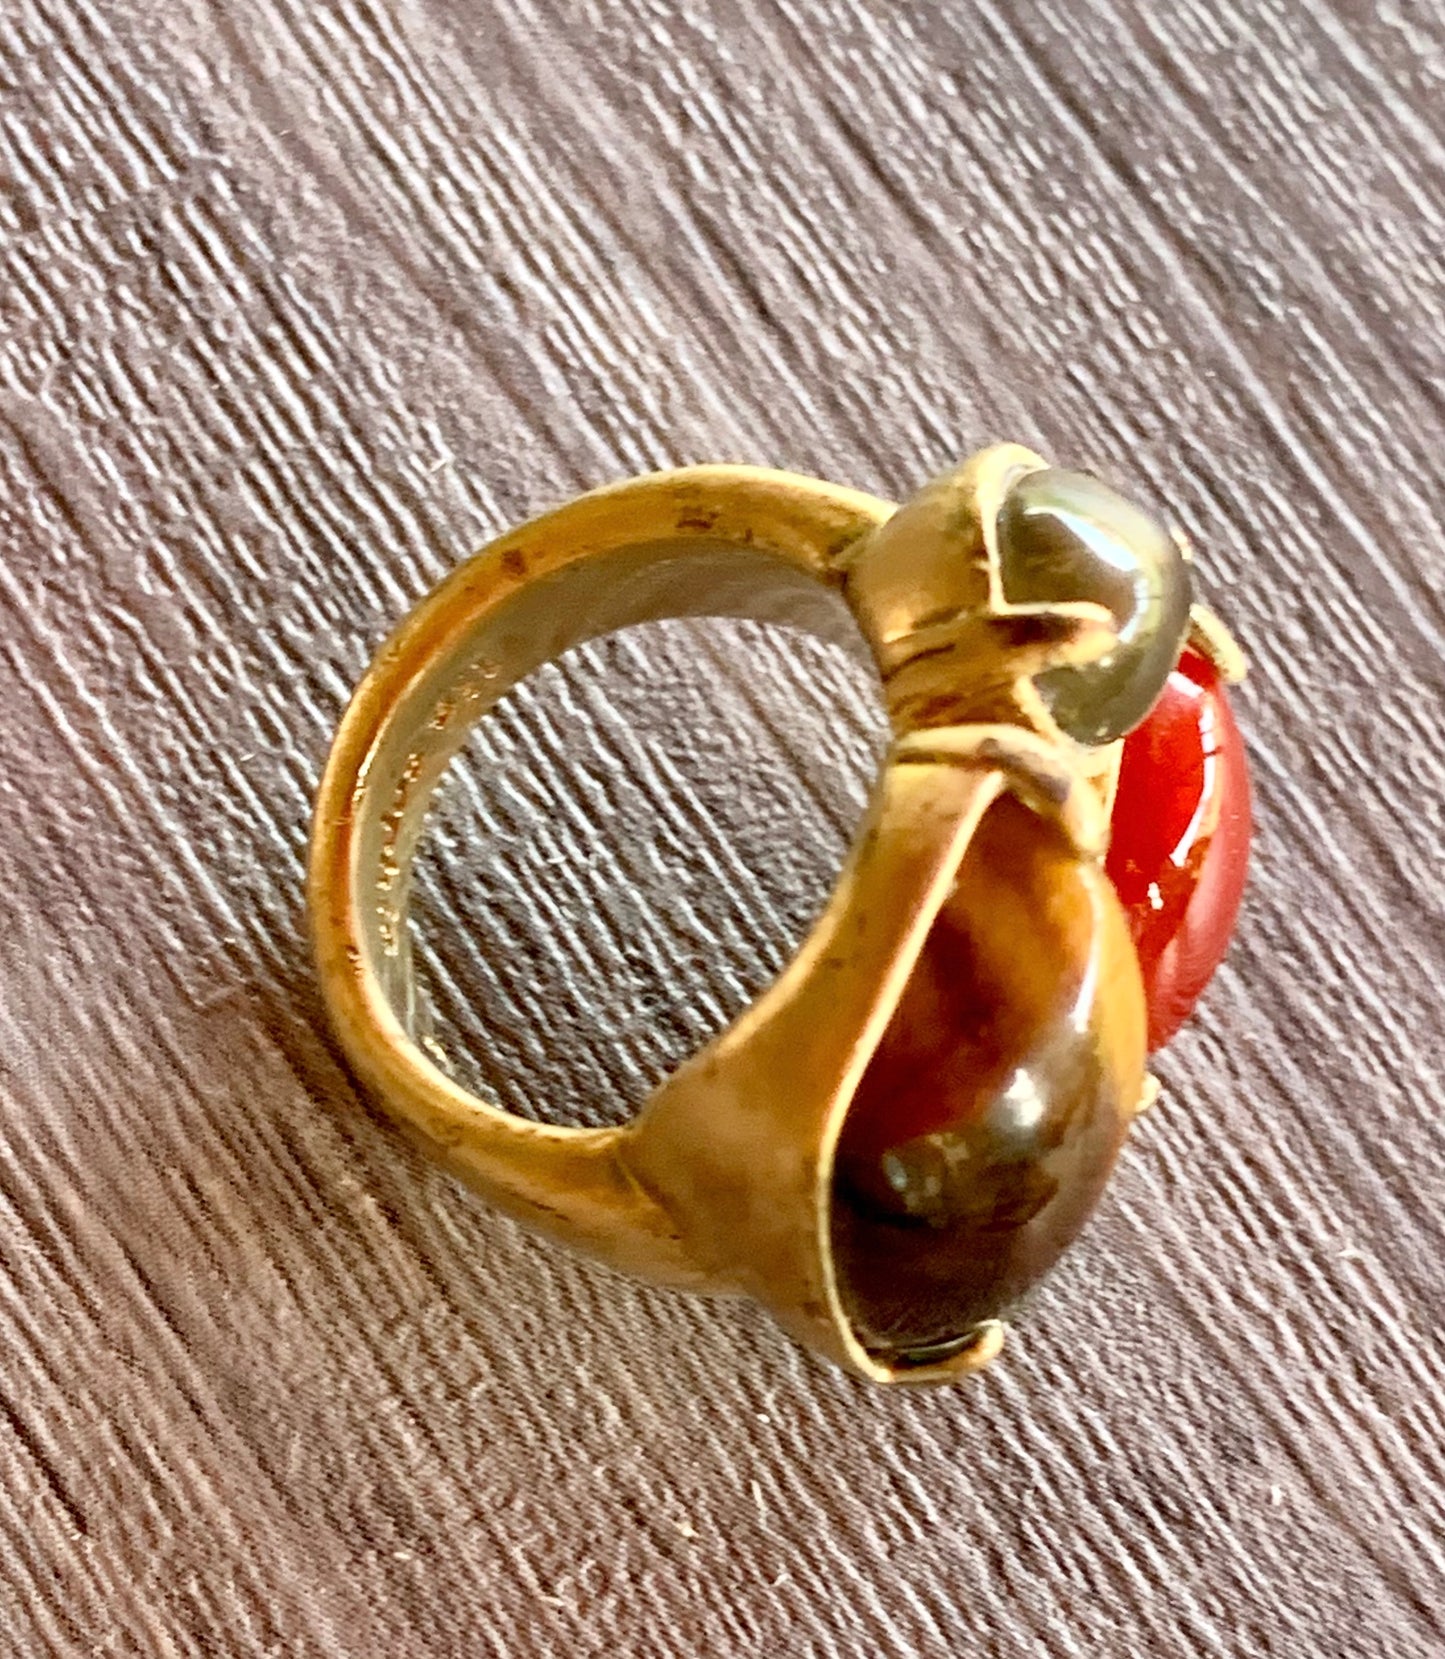 🔴SOLD🔴Vintage (Pre-Owned) Wealth Tigers Eye, Carnelian, Citrine, and Jade Power Ring Size 6